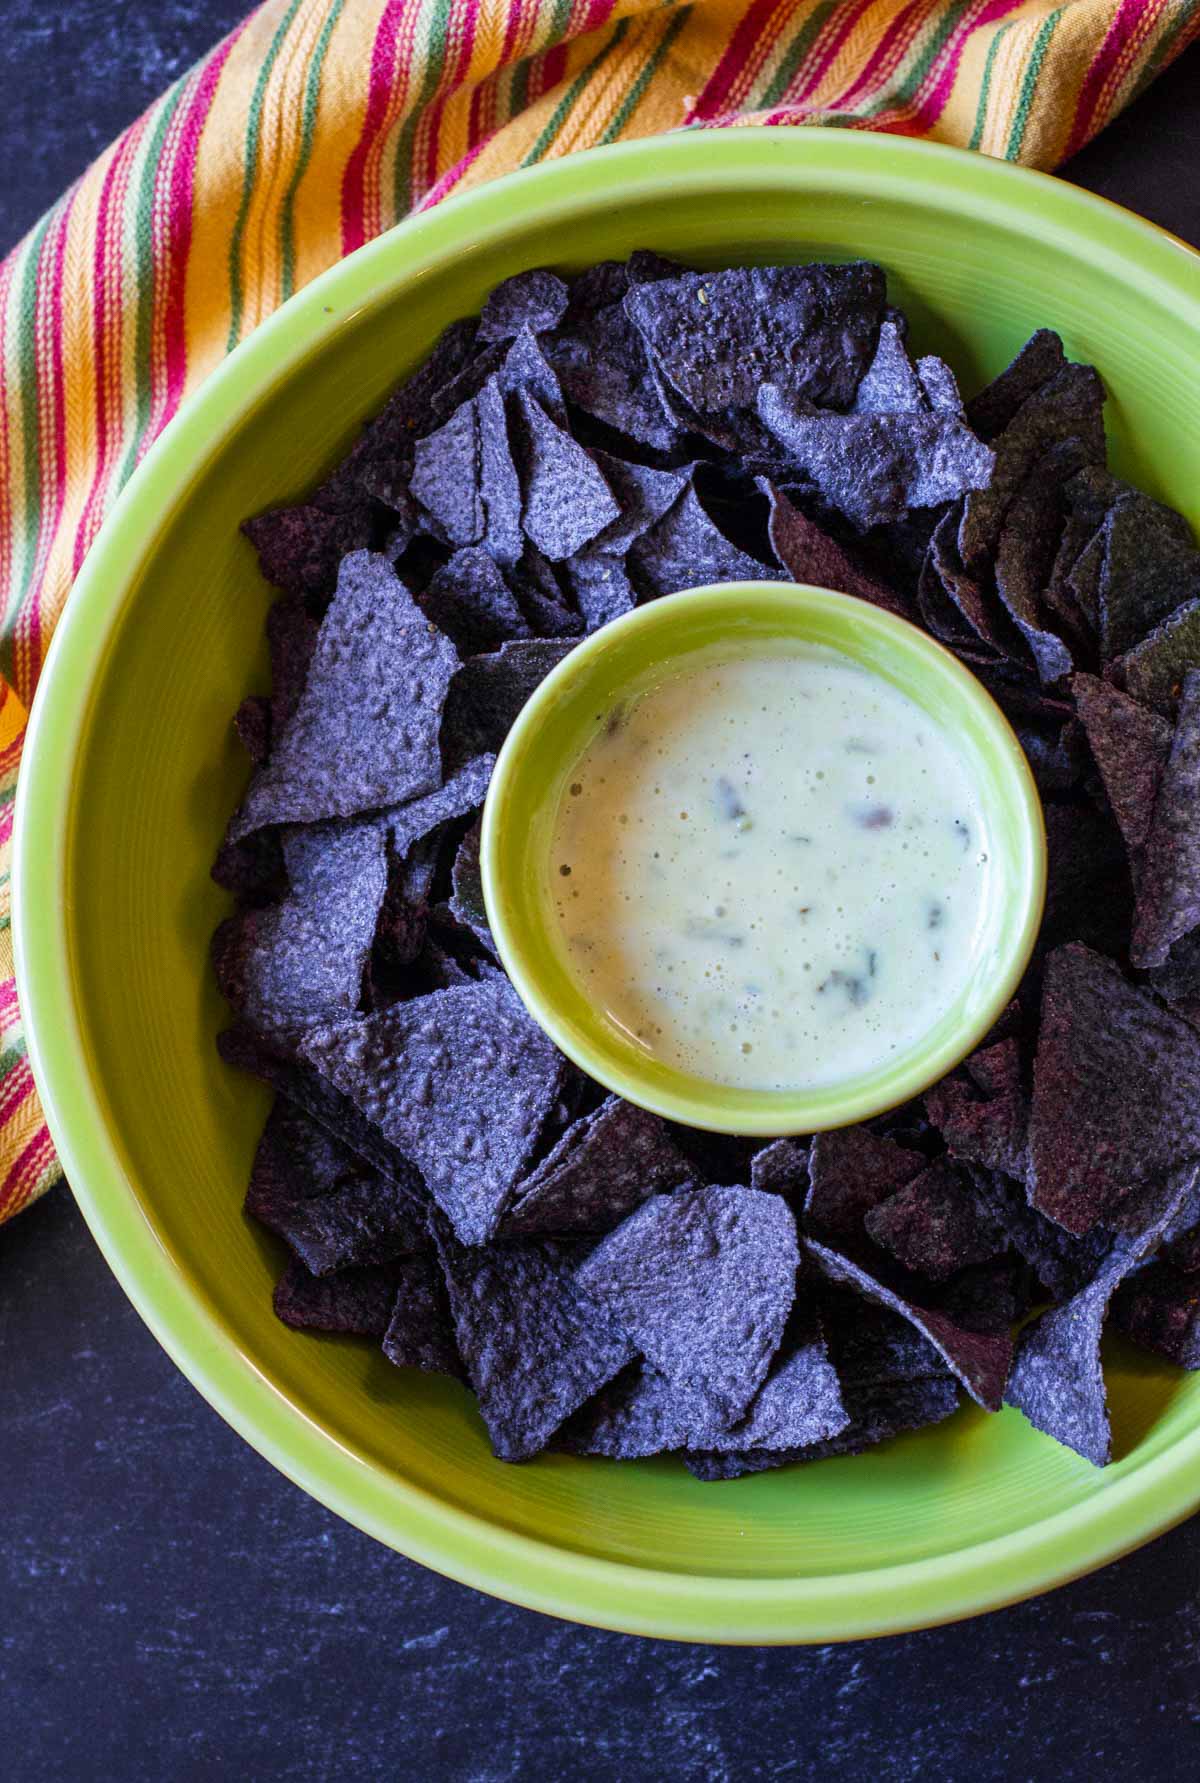 White queso dip served in a Fiesta Ware Green chips and dip plate with blue corn tornillas.